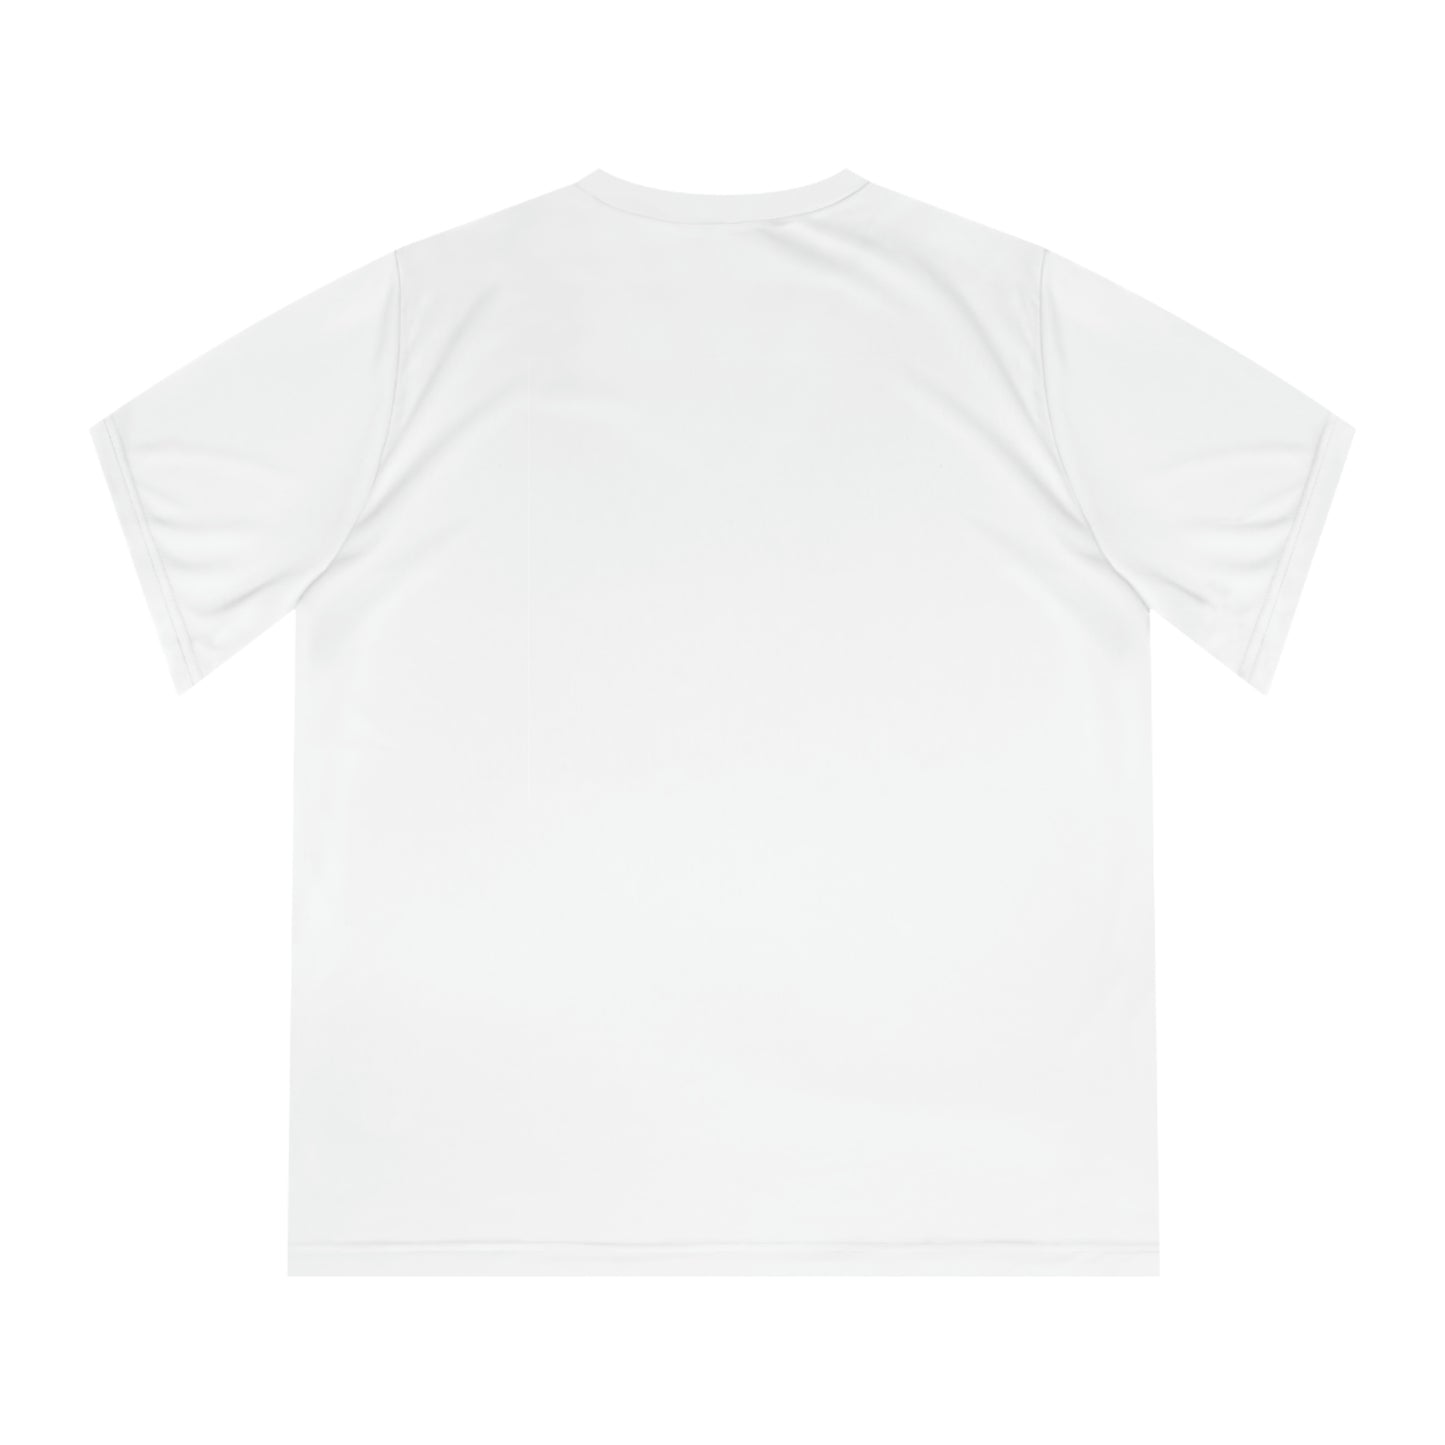 Flat back view of the White t-shirt